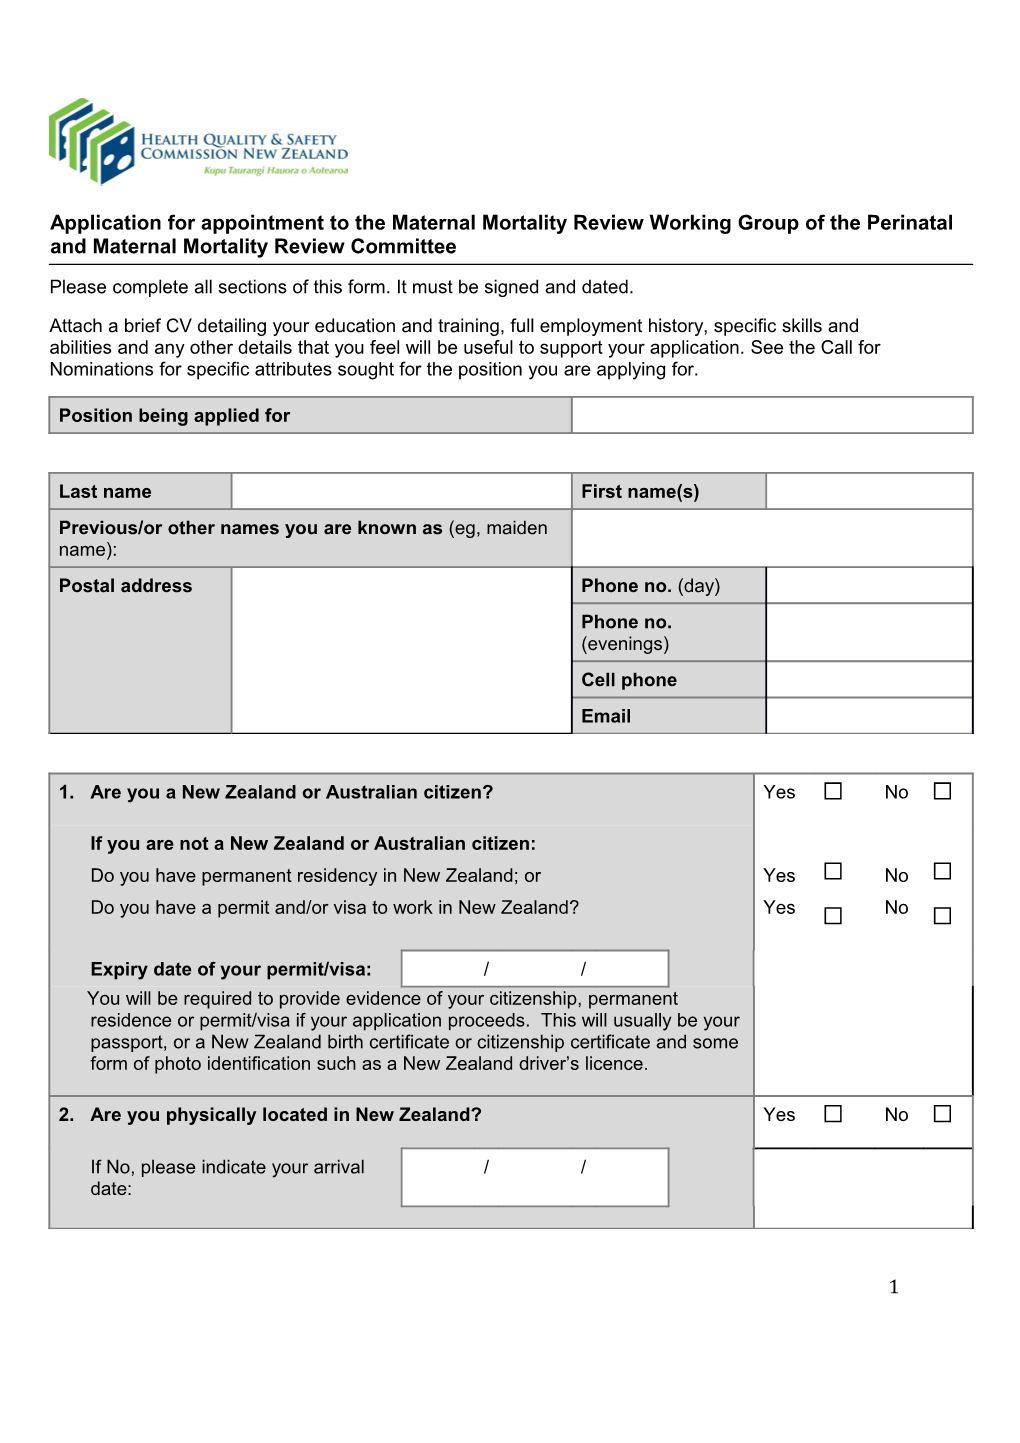 Please Complete All Sections of This Form. It Must Be Signed and Dated